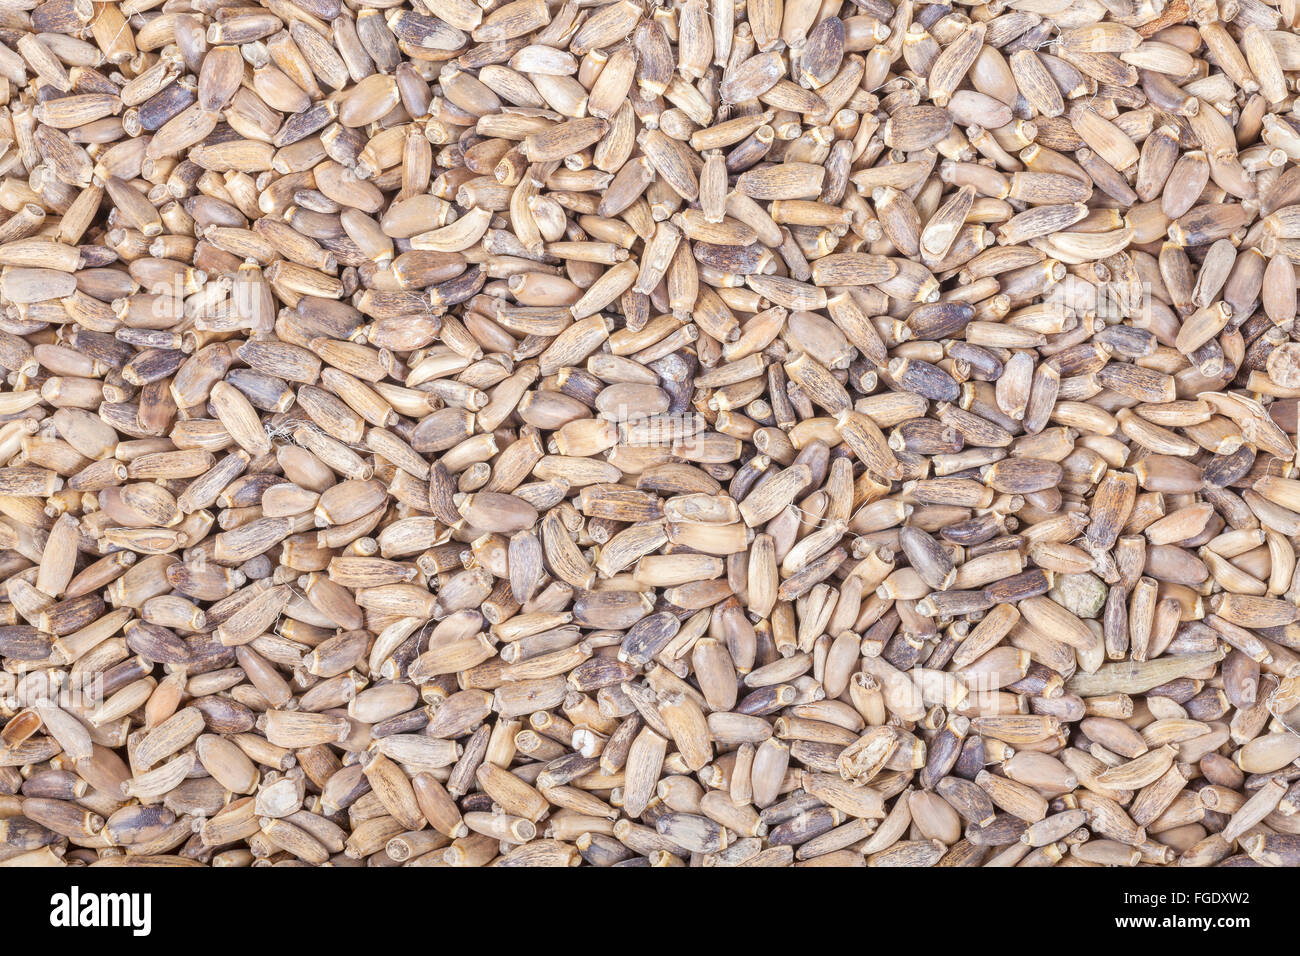 Close up picture of milk thistle seeds, food background. Stock Photo